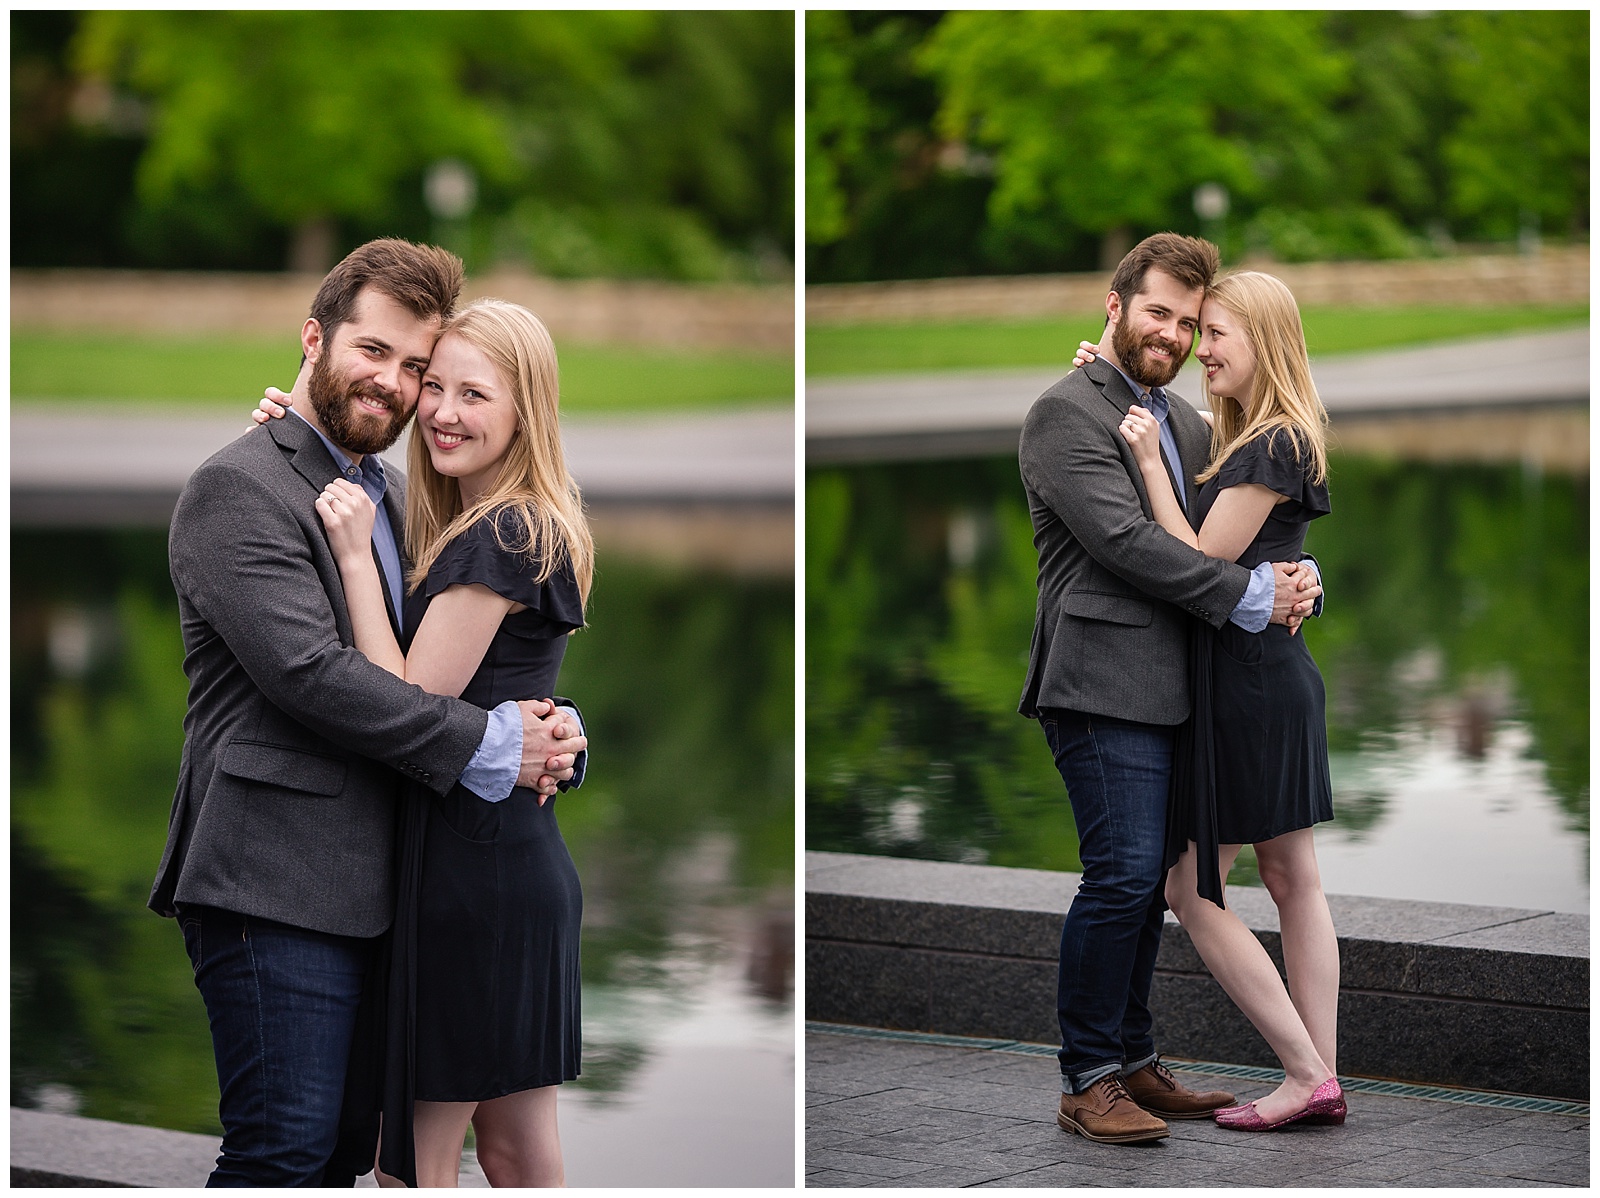 An engagement session at the Nelson-Atkins Museum of Art in Kansas City.